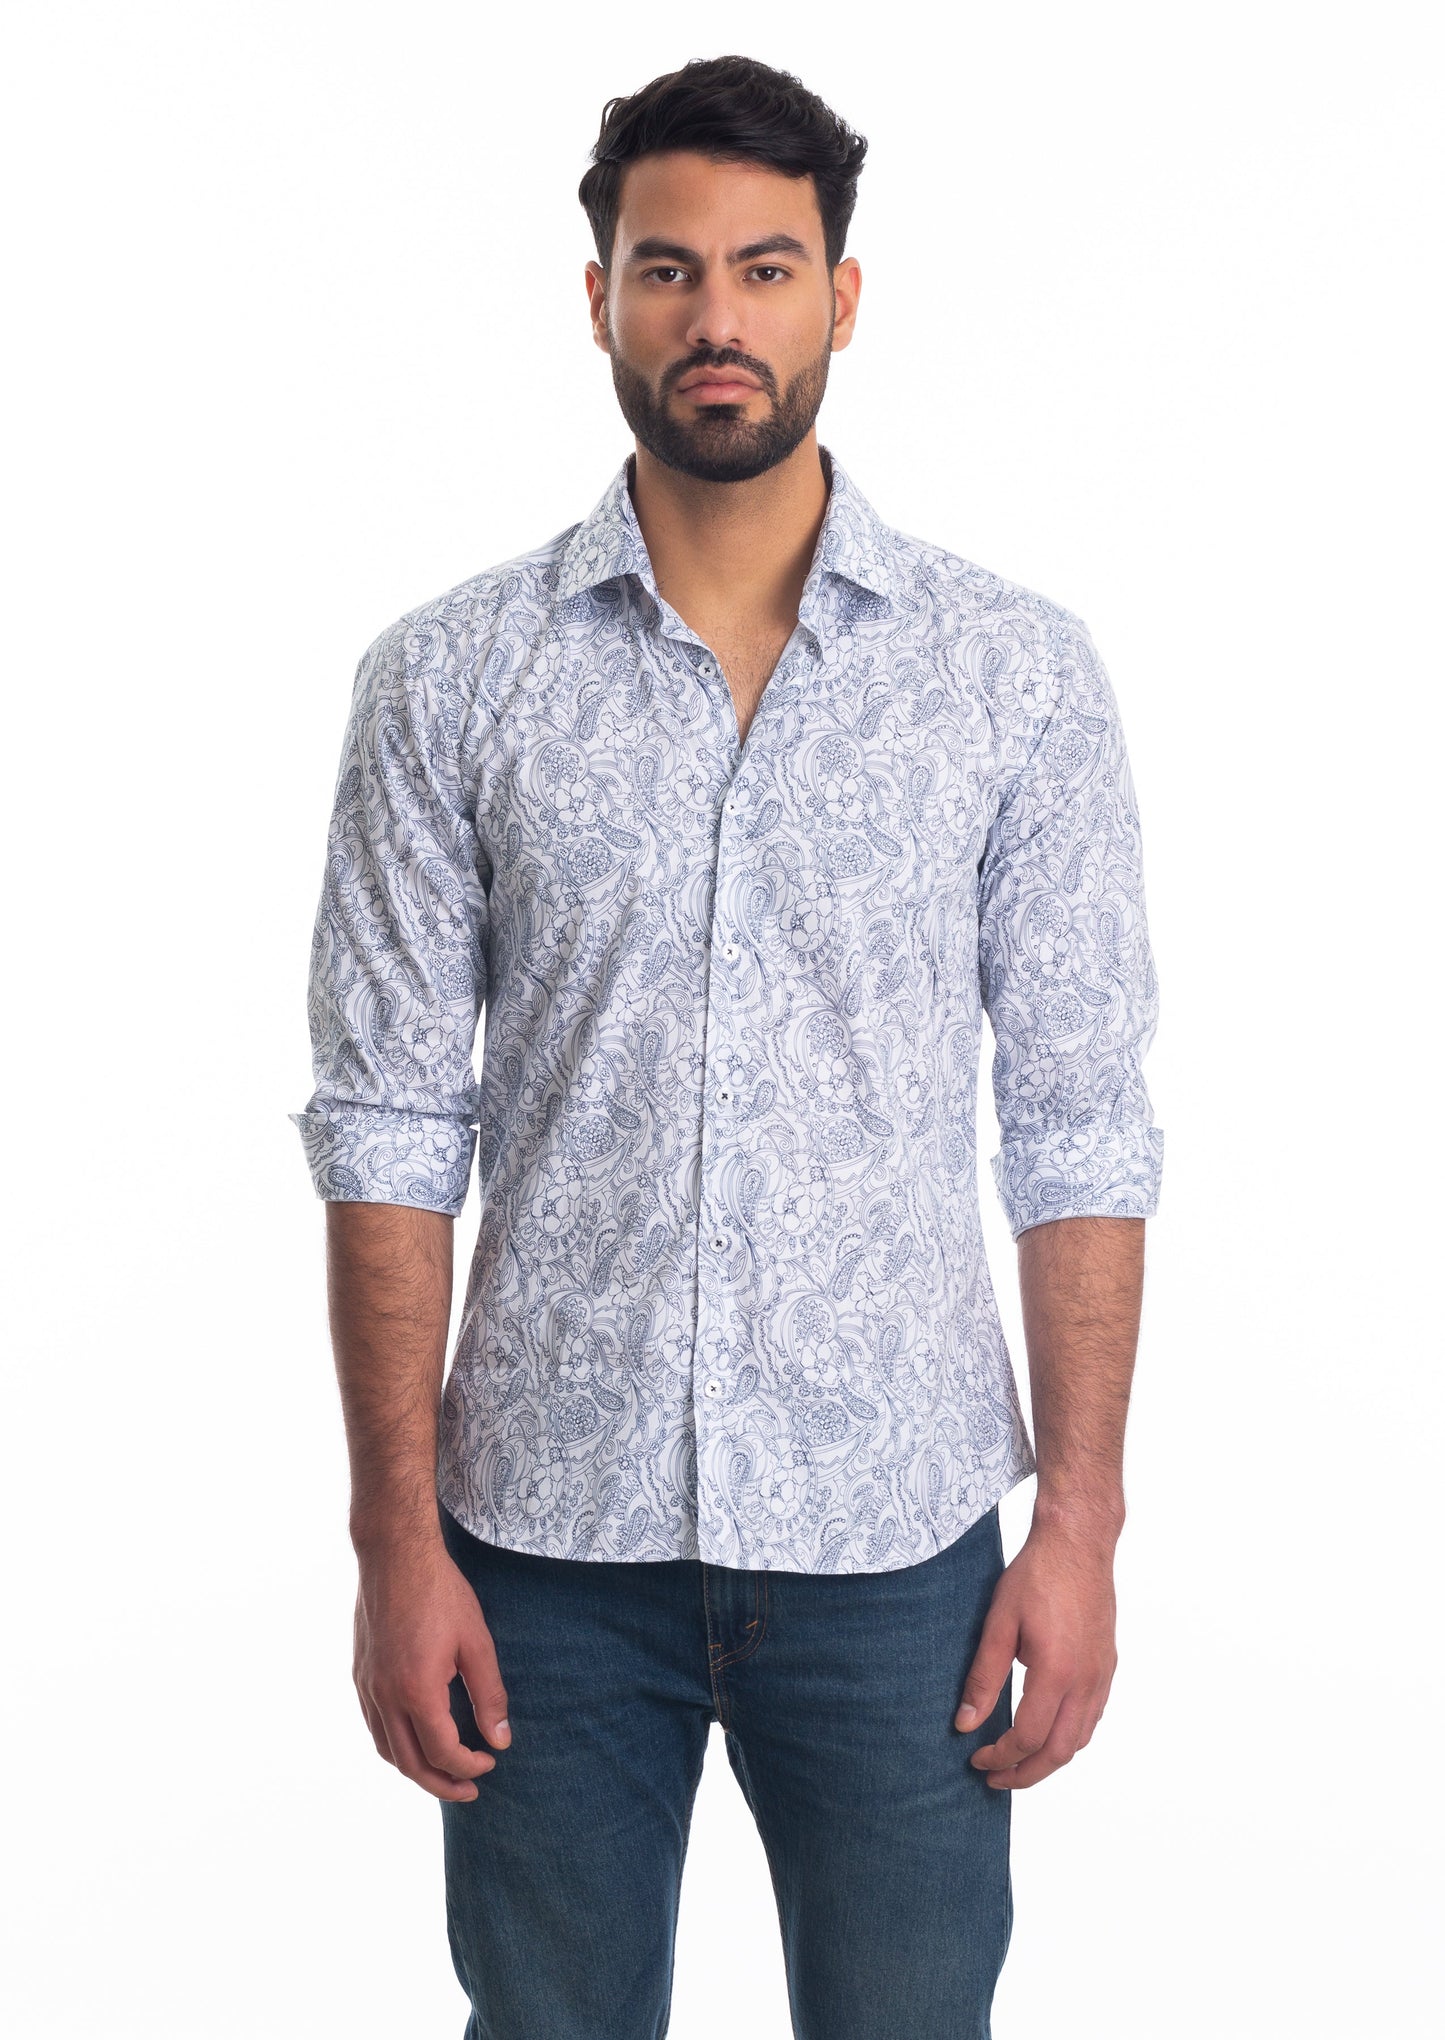 White Paisley Long Sleeve Shirt T-6812 Front